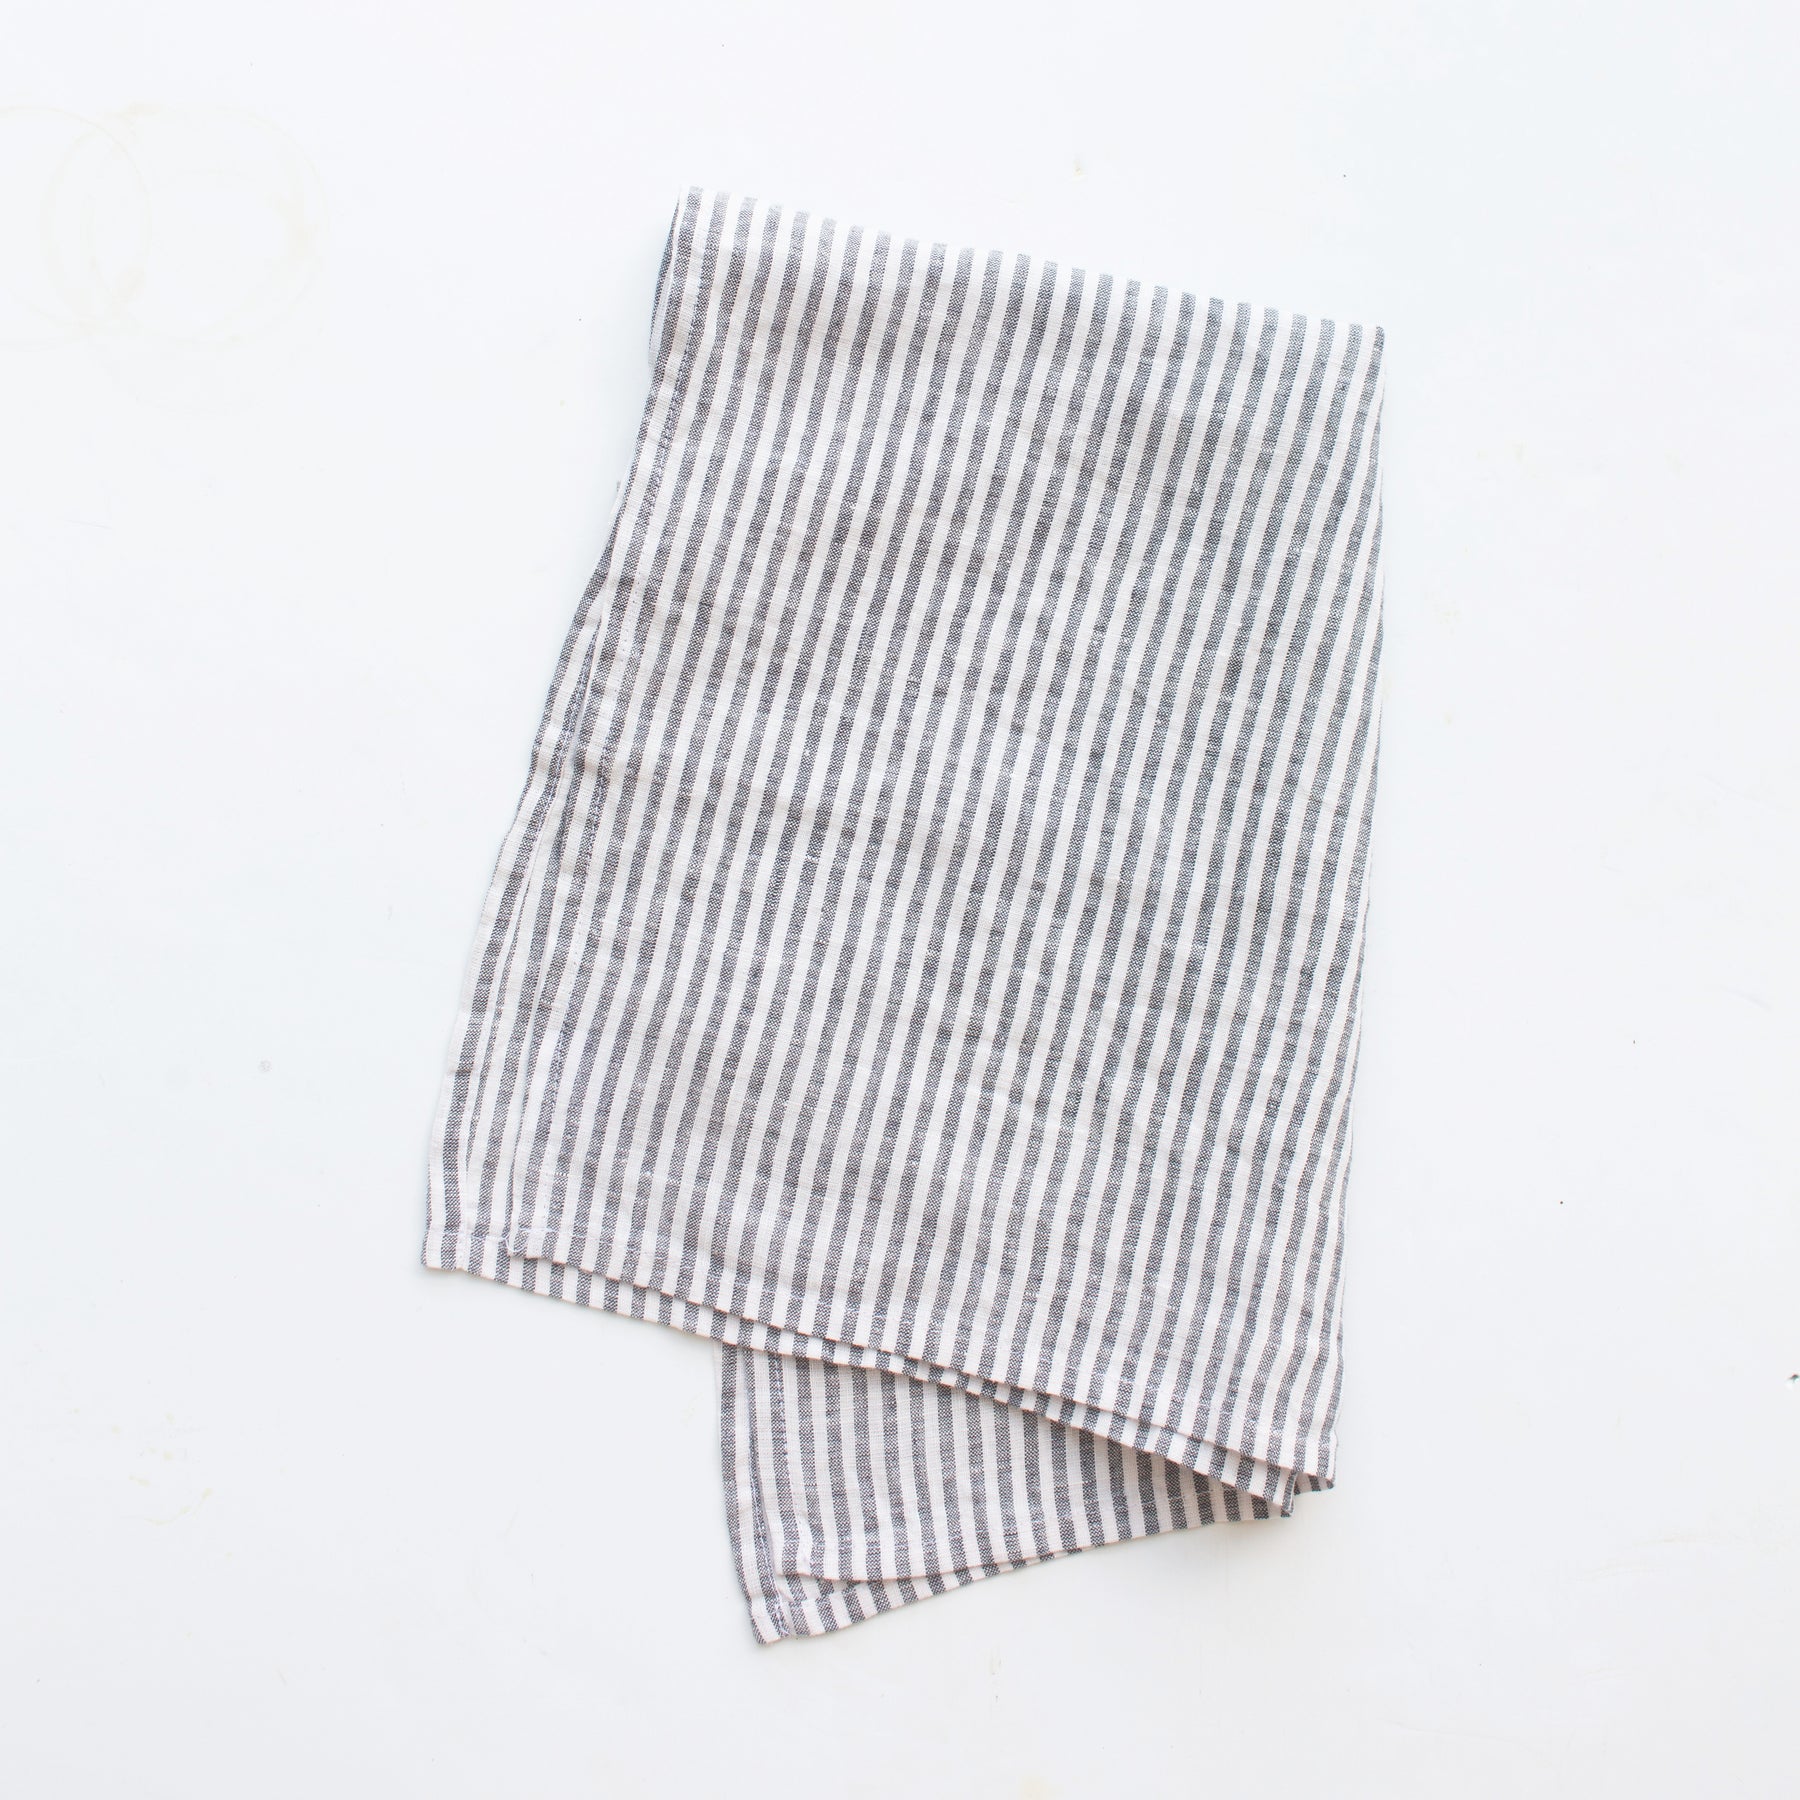 Set of 2 Linen Tea Towels Navy With Natural. Washed Linen Kitchen